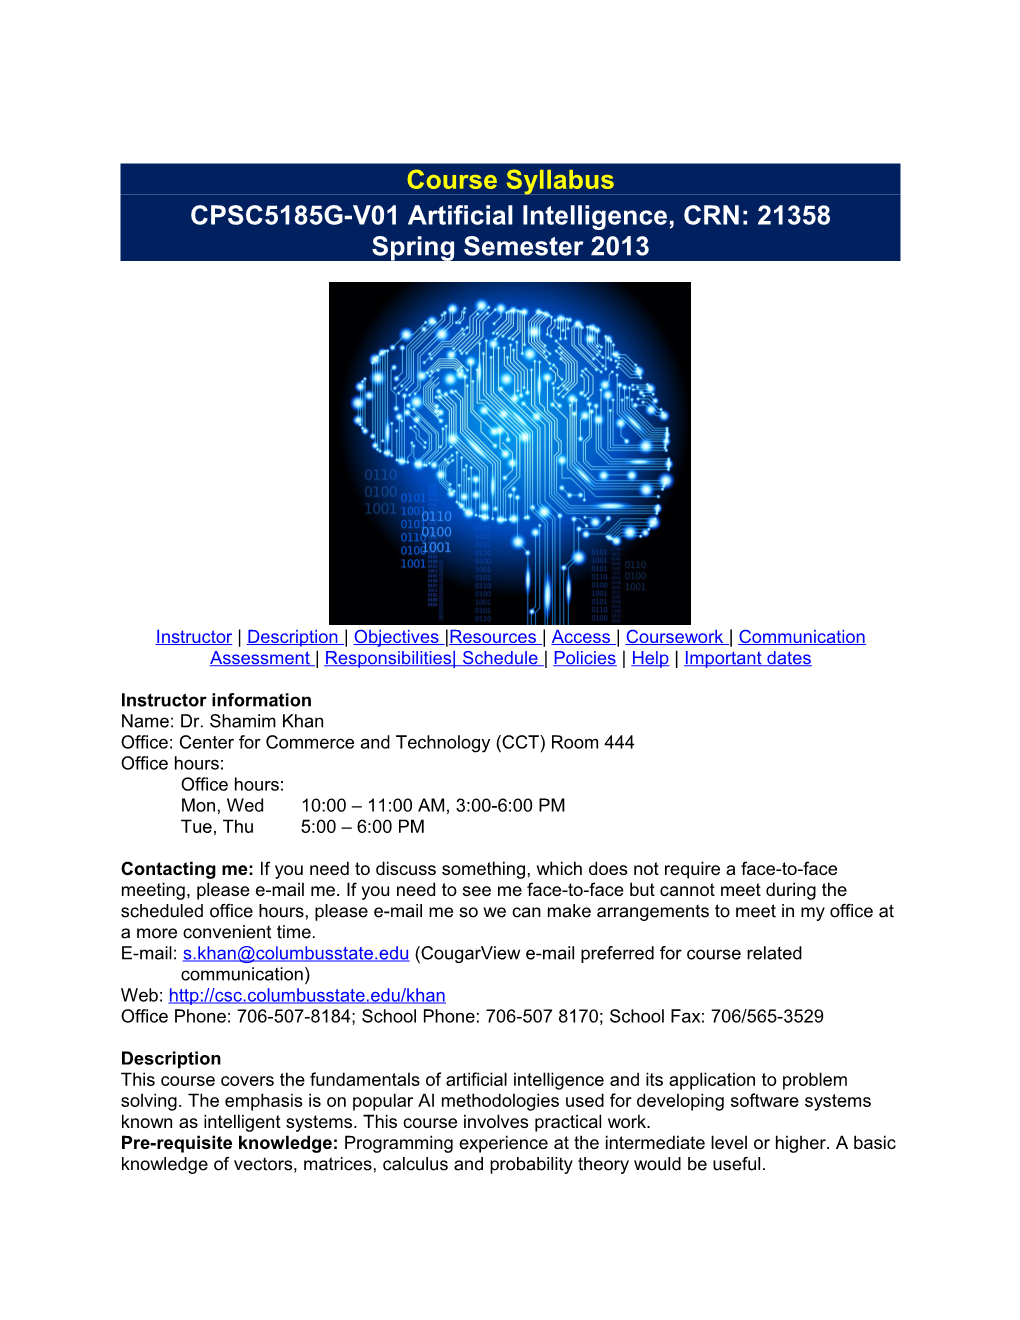 CPSC5185G-V01 Artificial Intelligence, CRN: 21358